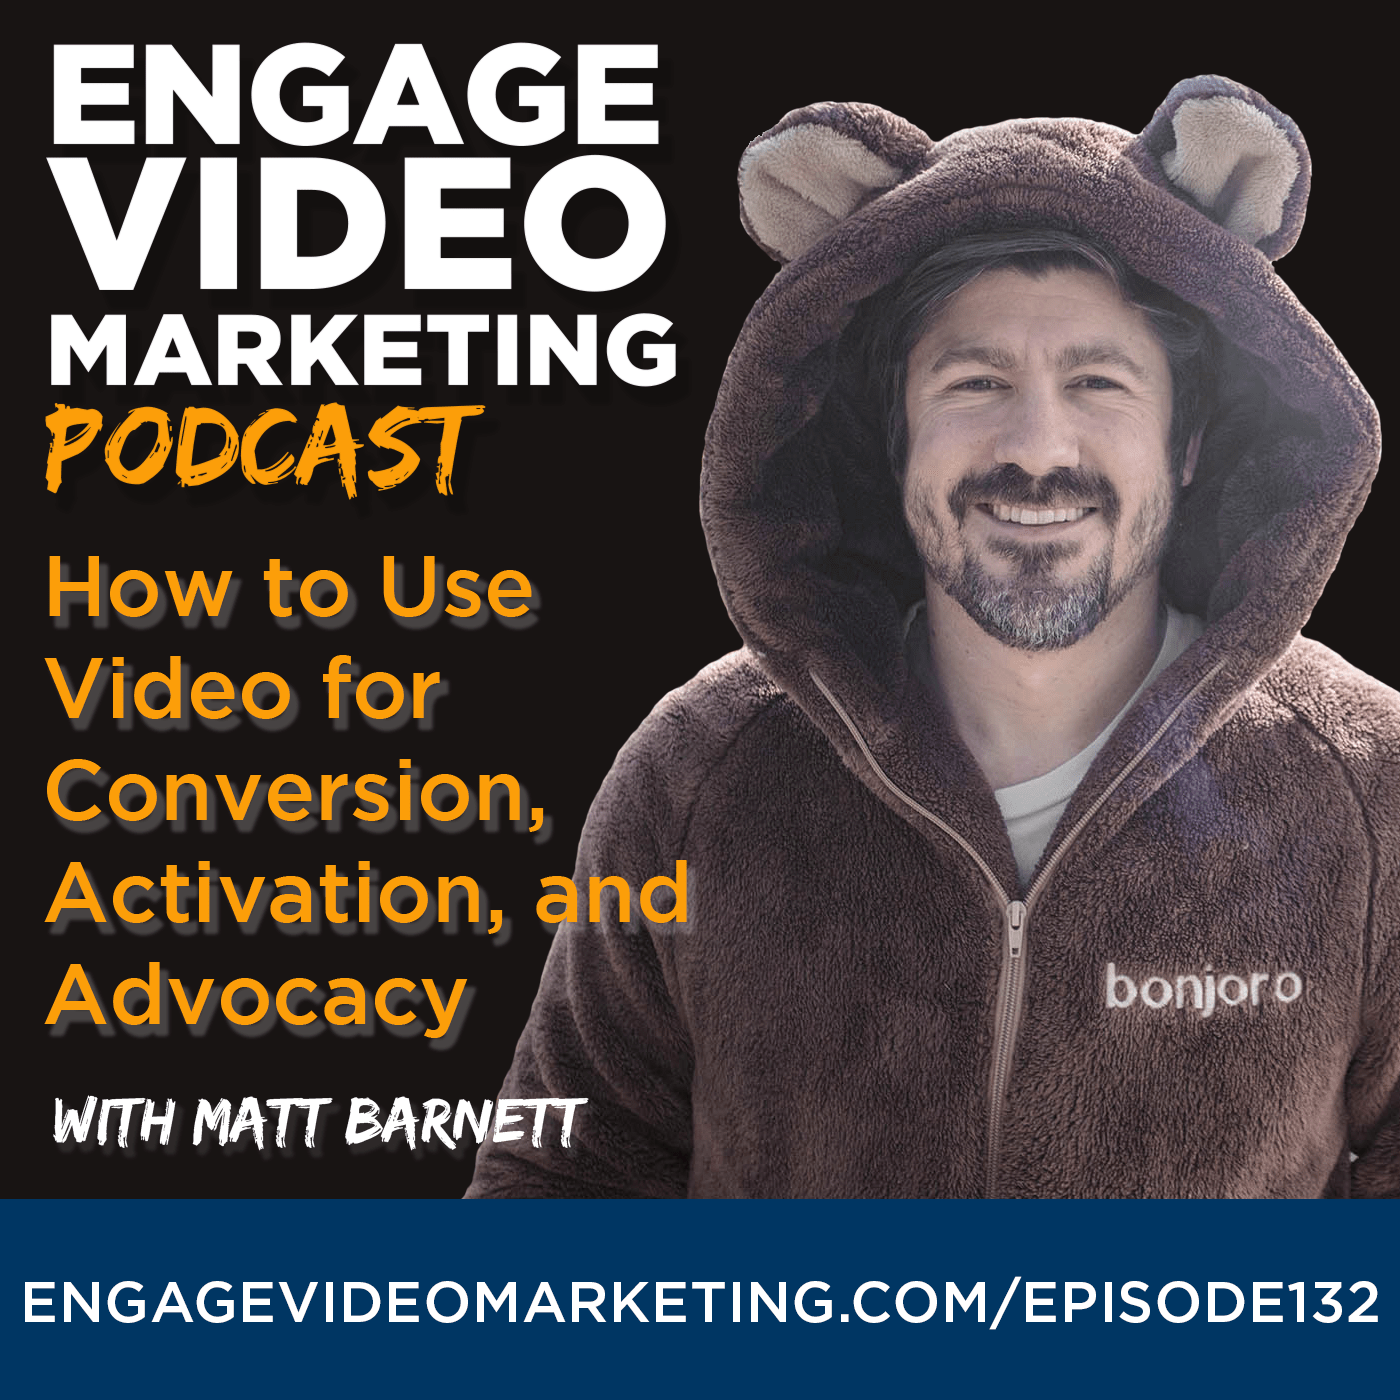 How to Use Video for Conversion, Activation and Advocacy with Matt Barnett